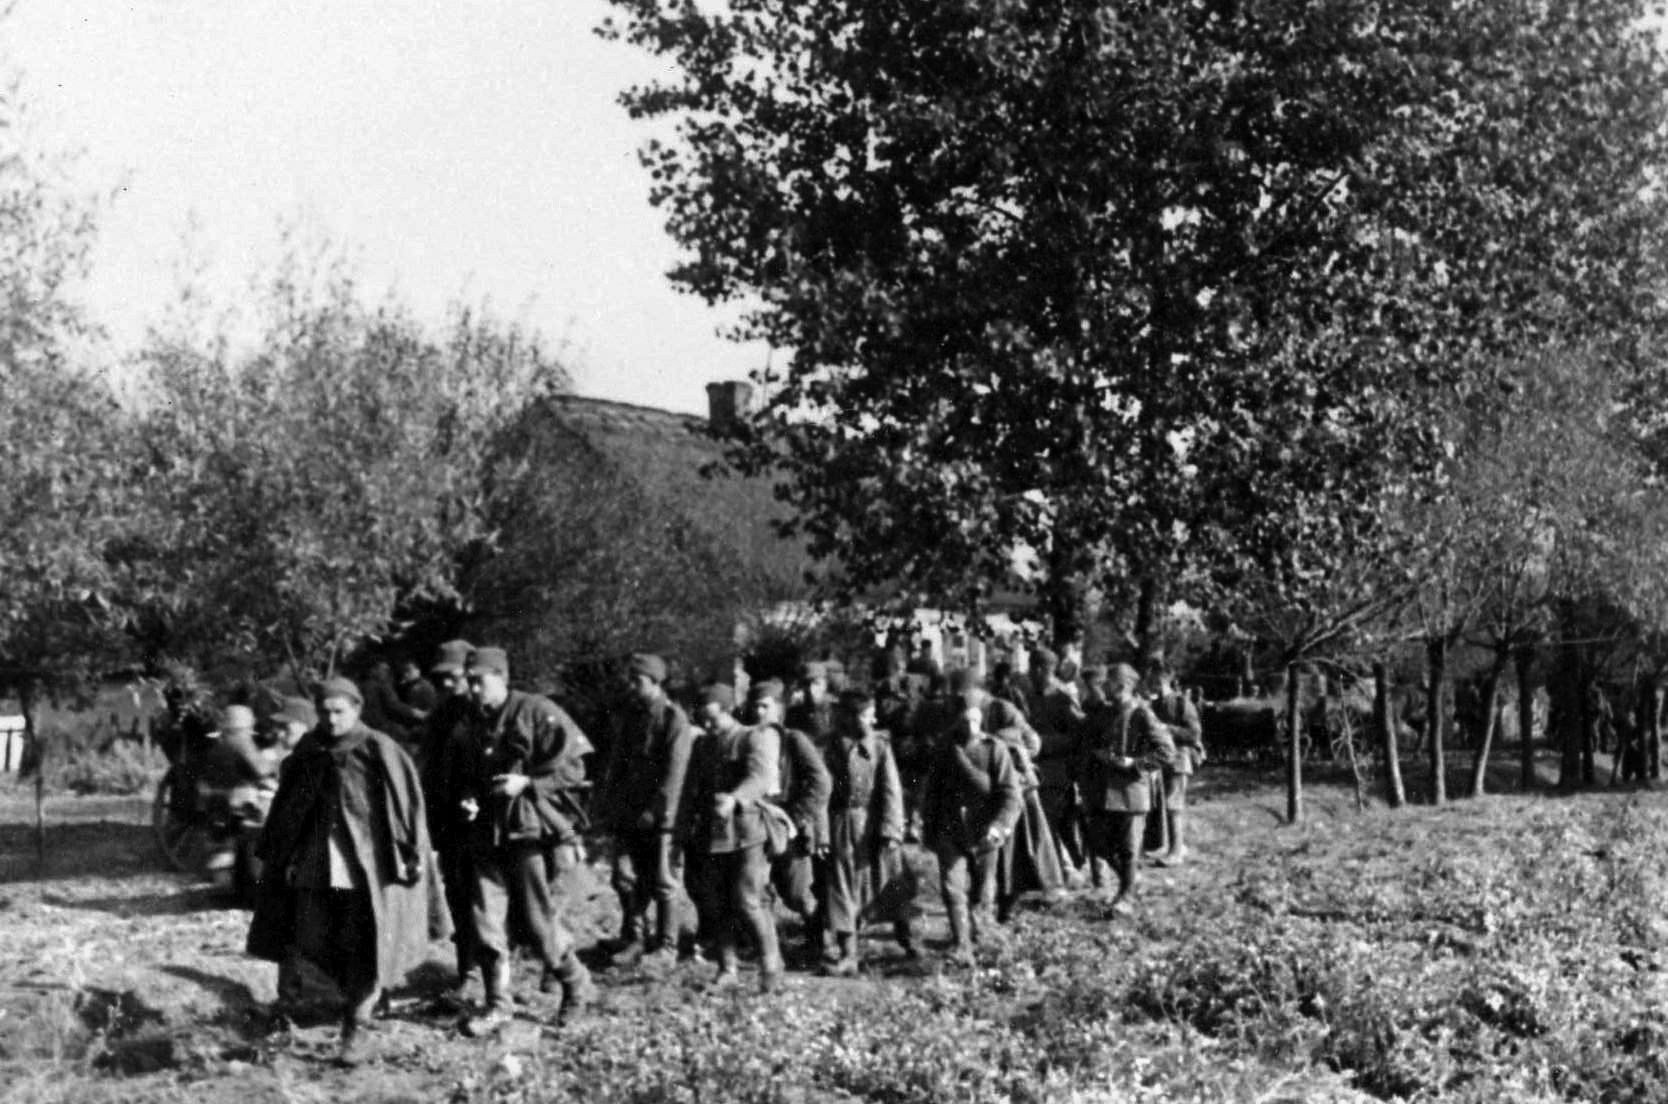 A dazed group of Polish troops, captured by the invading Germans after being cut off and forced to surrender, makes its way toward a rear area. 